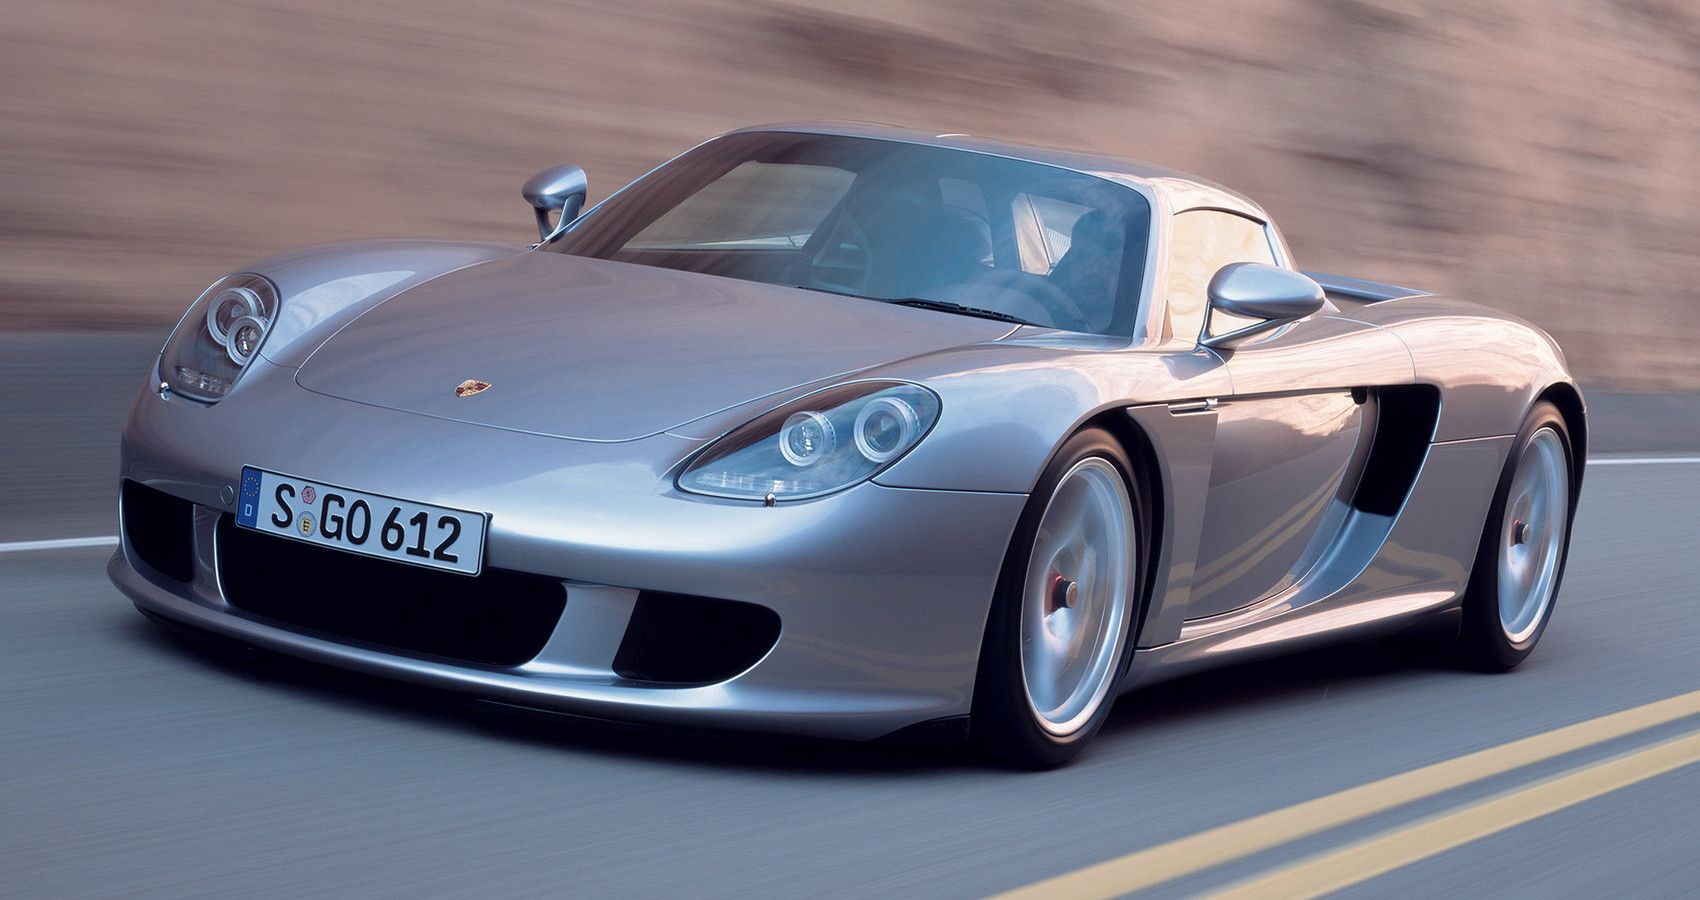 These Popular Sports Cars Have The Worst Handling